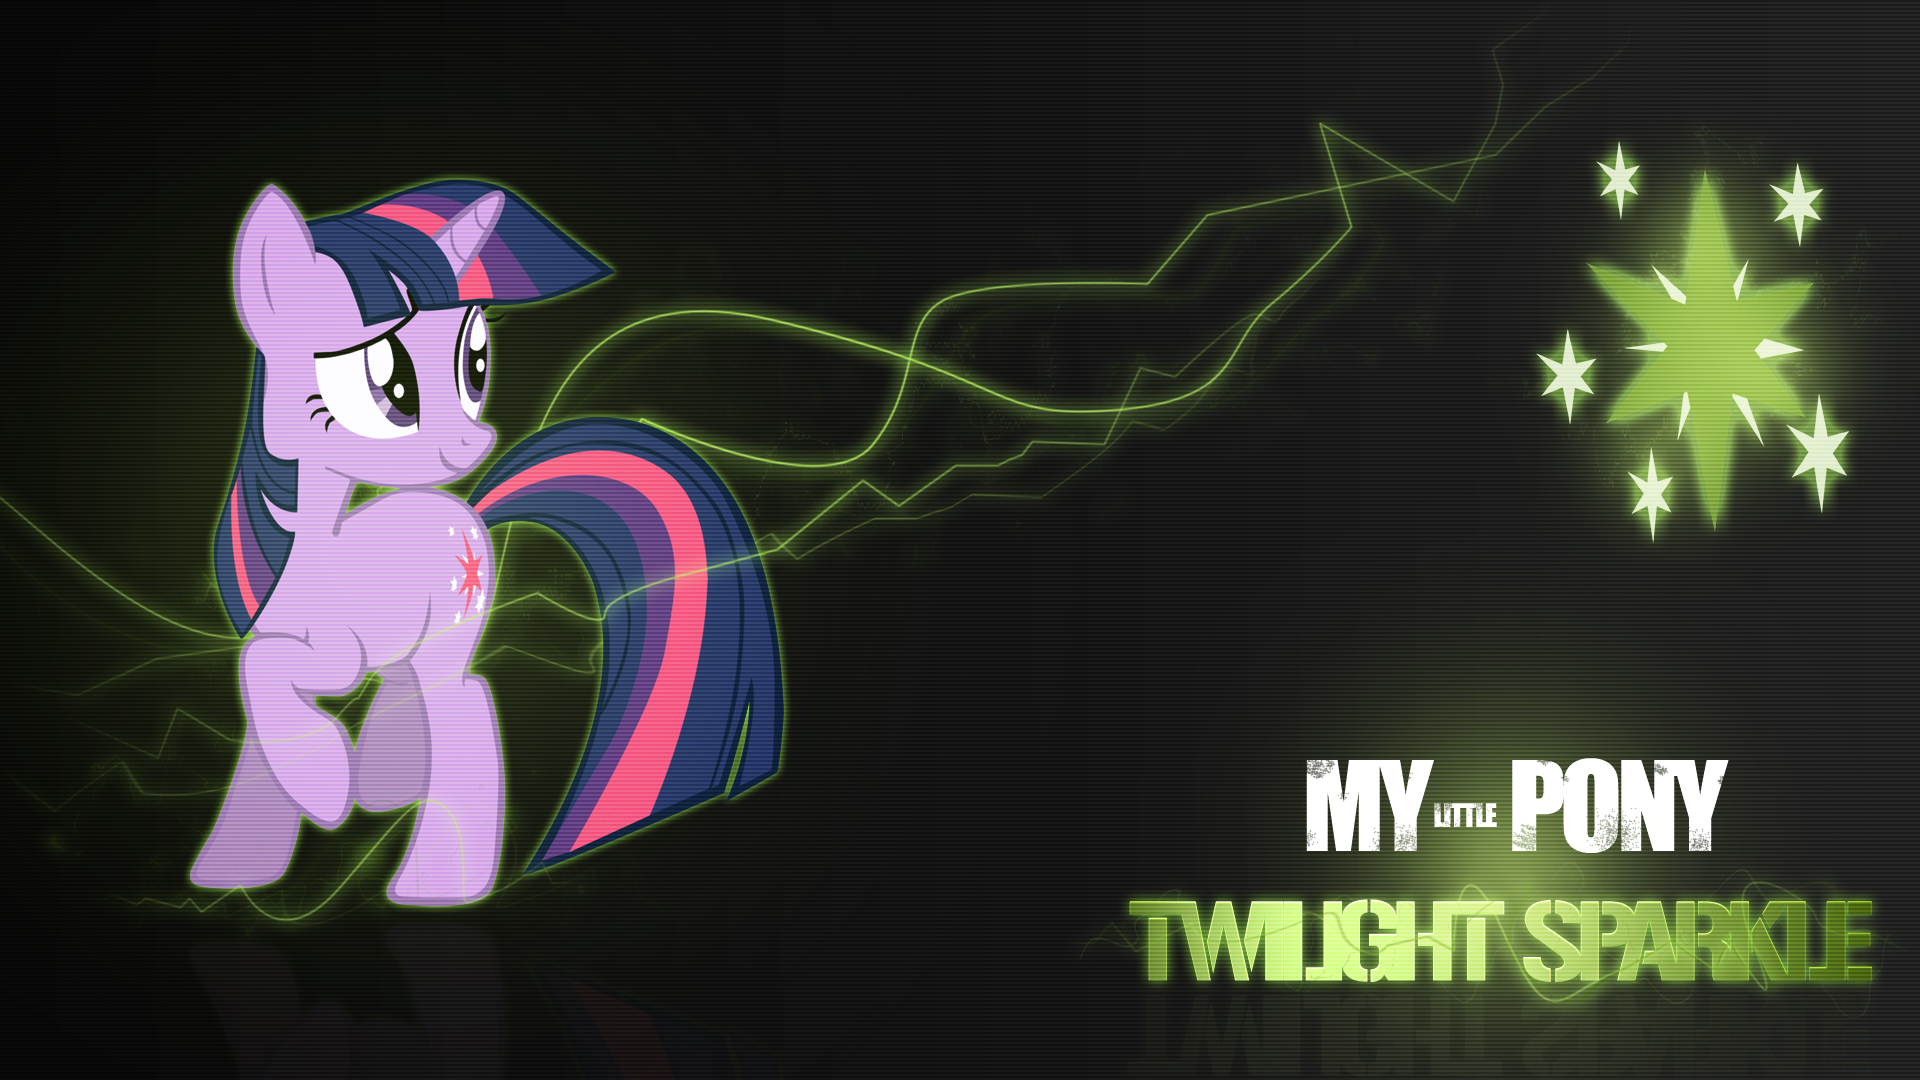 MWallaper - Twilight Sparkle by AncientKale, BlackGryph0n and Mackaged